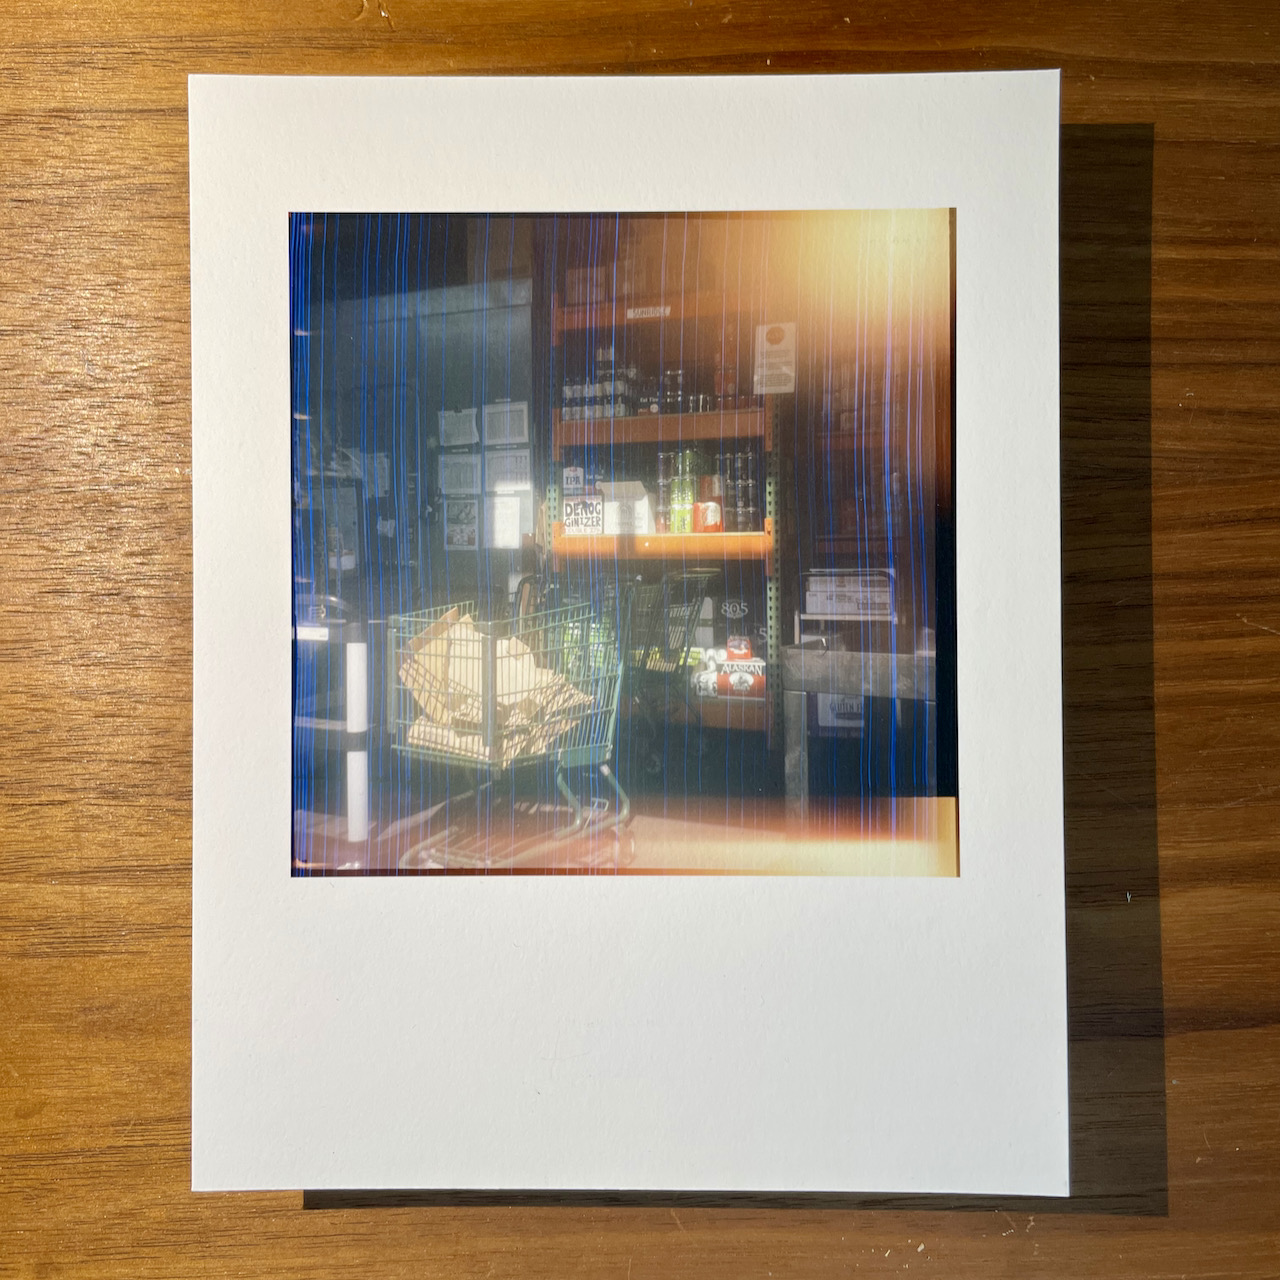 A photo print of the back stock room of a grocery store with sunlight filtering in. There’s light leak in the corner and the film emulsion was horribly scratched